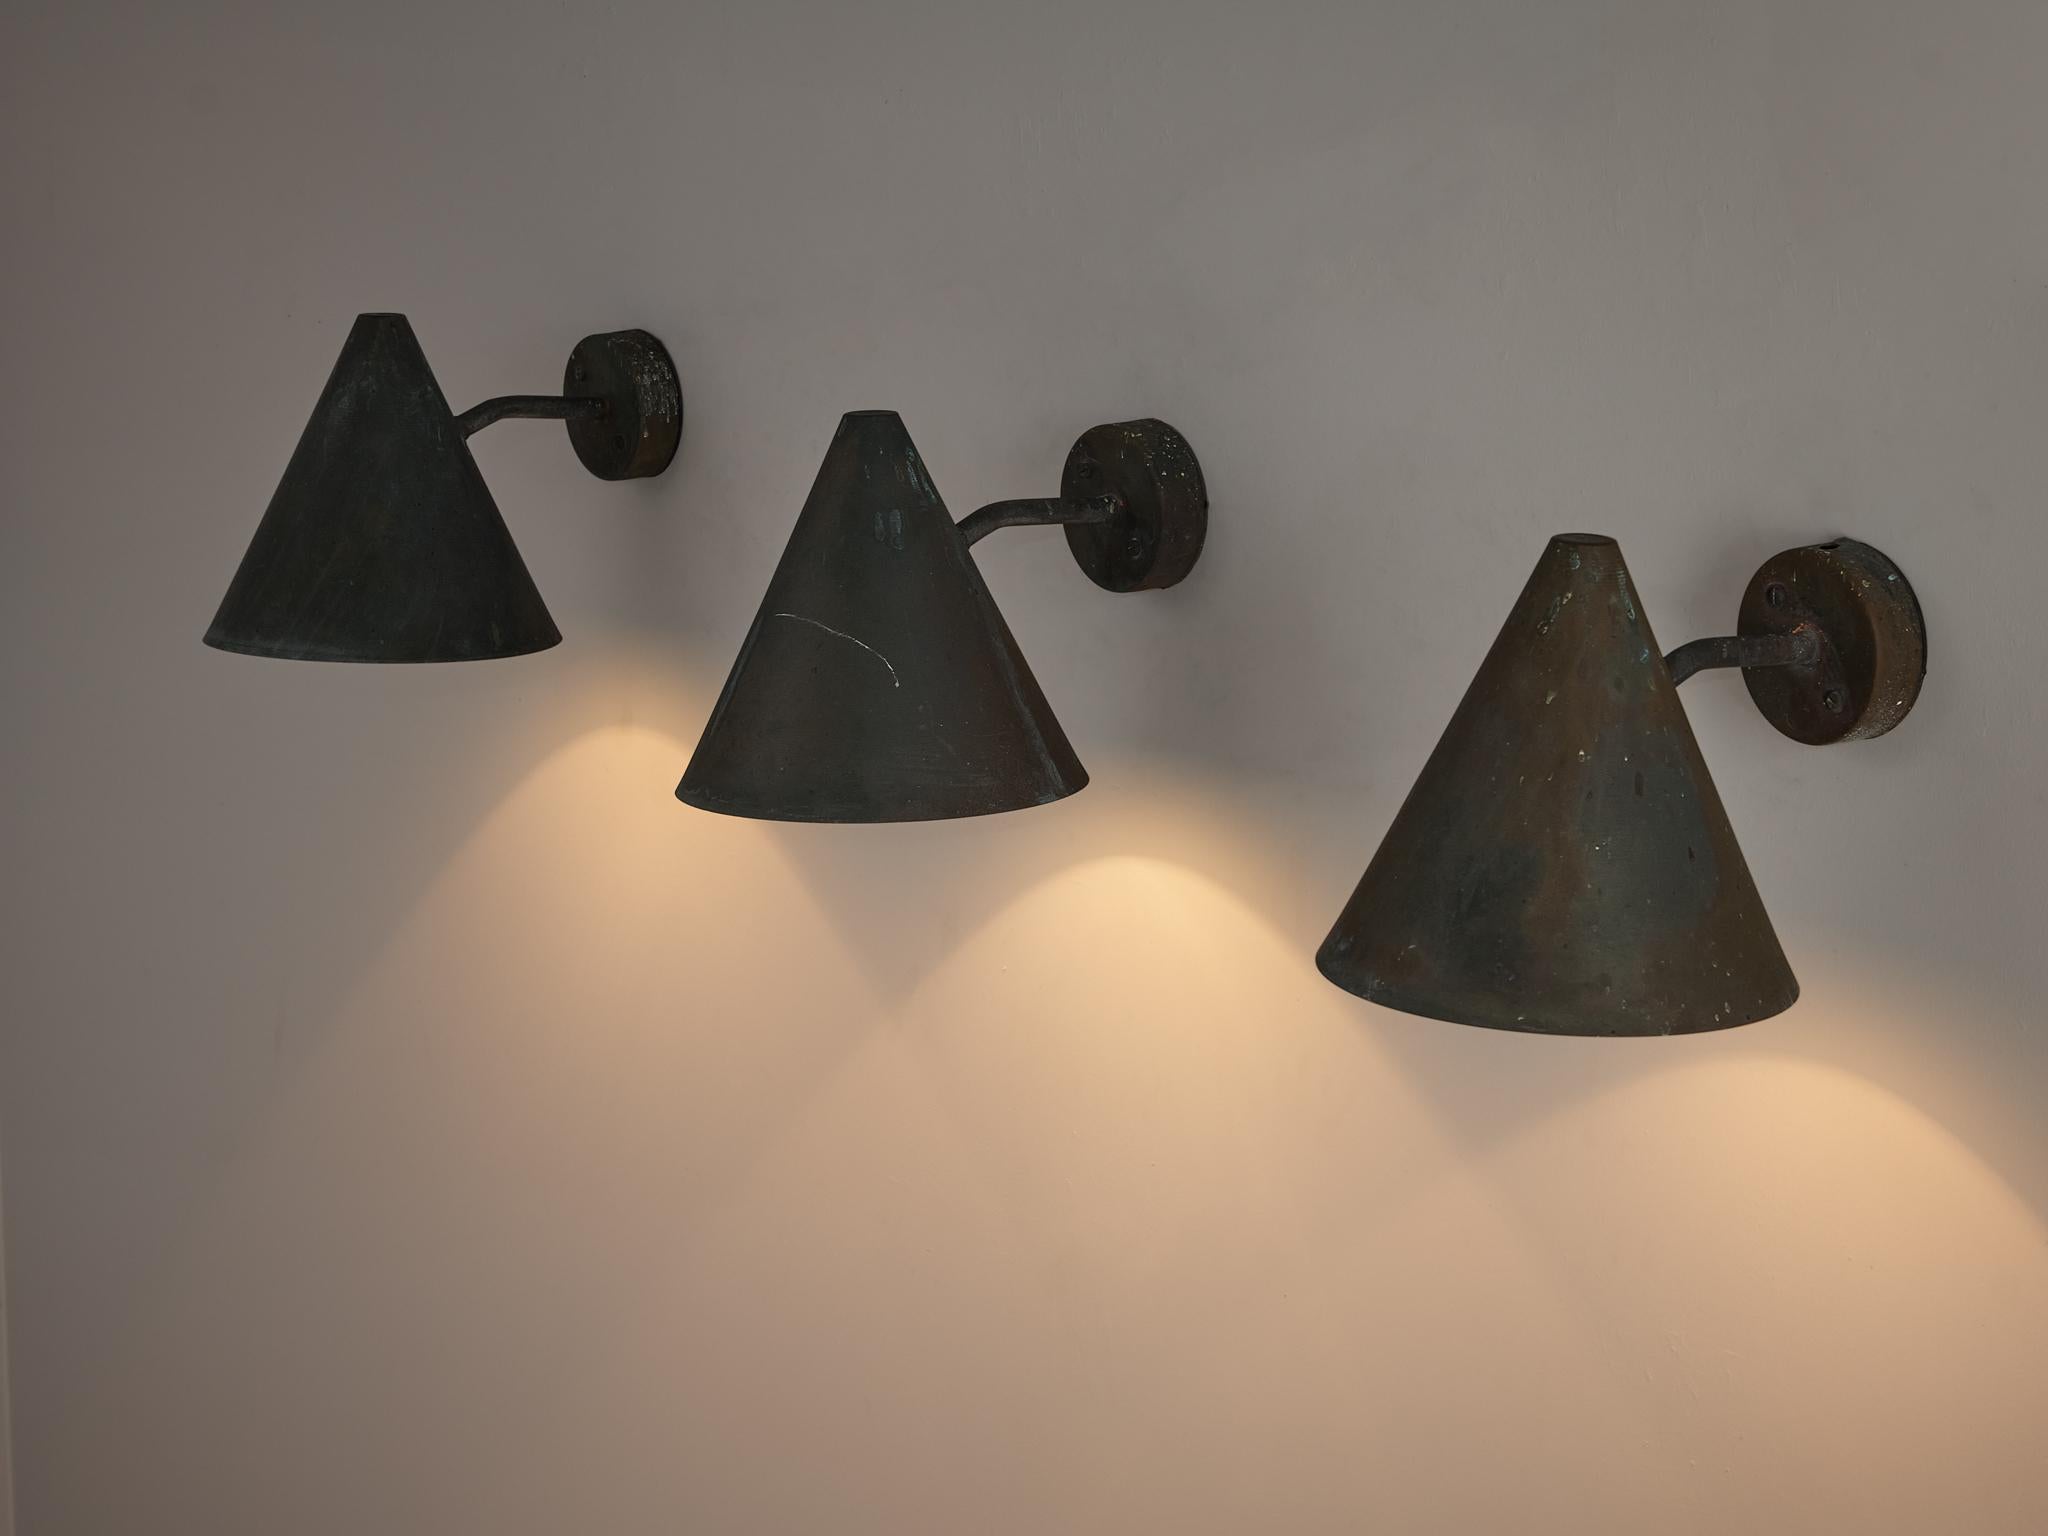 Mid-20th Century Hans-Agne Jakobsson 'Tratten' Wall Light in Patinated Copper